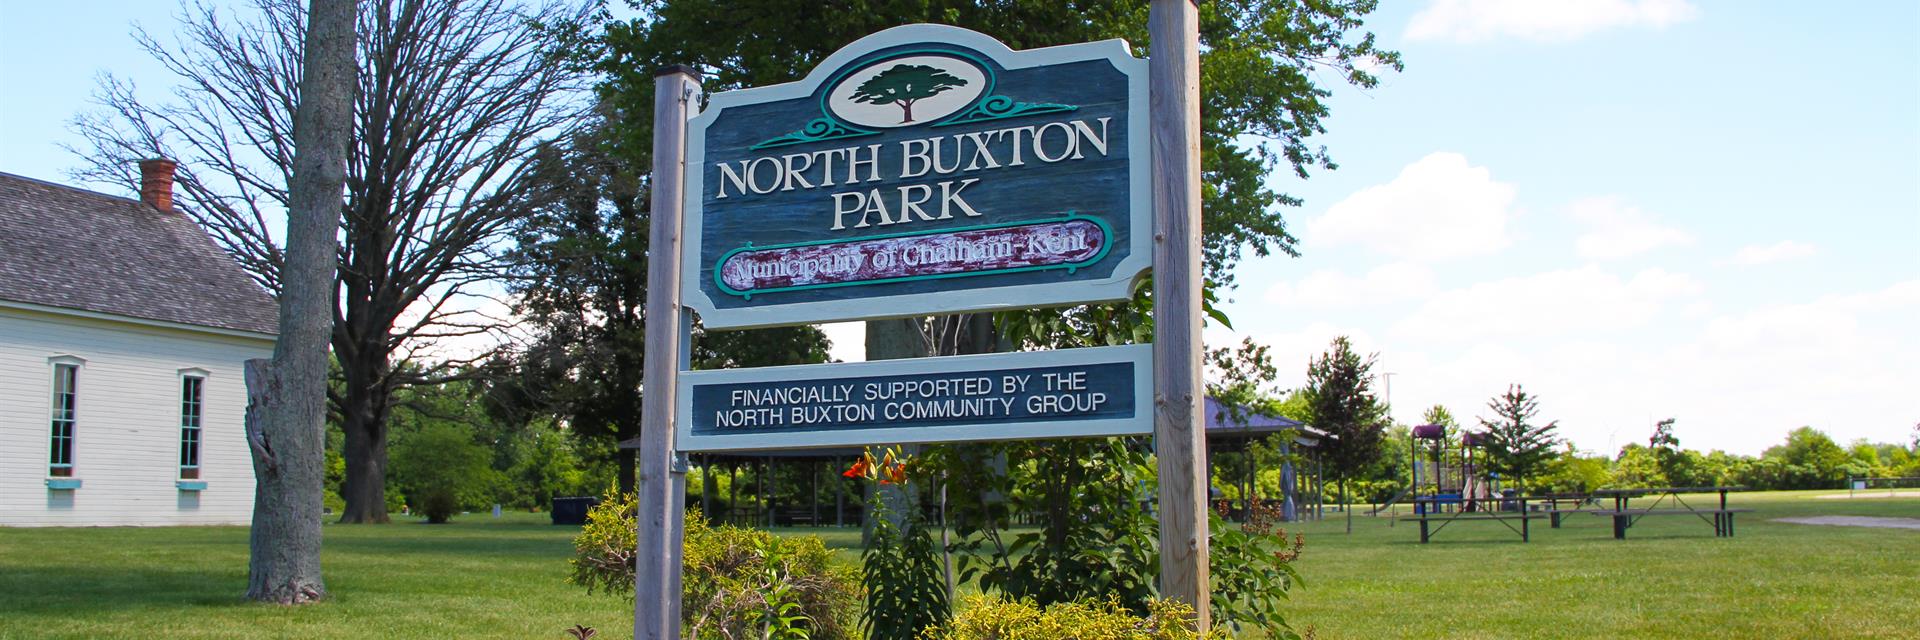 North Buxton Park sign in a flower bed.